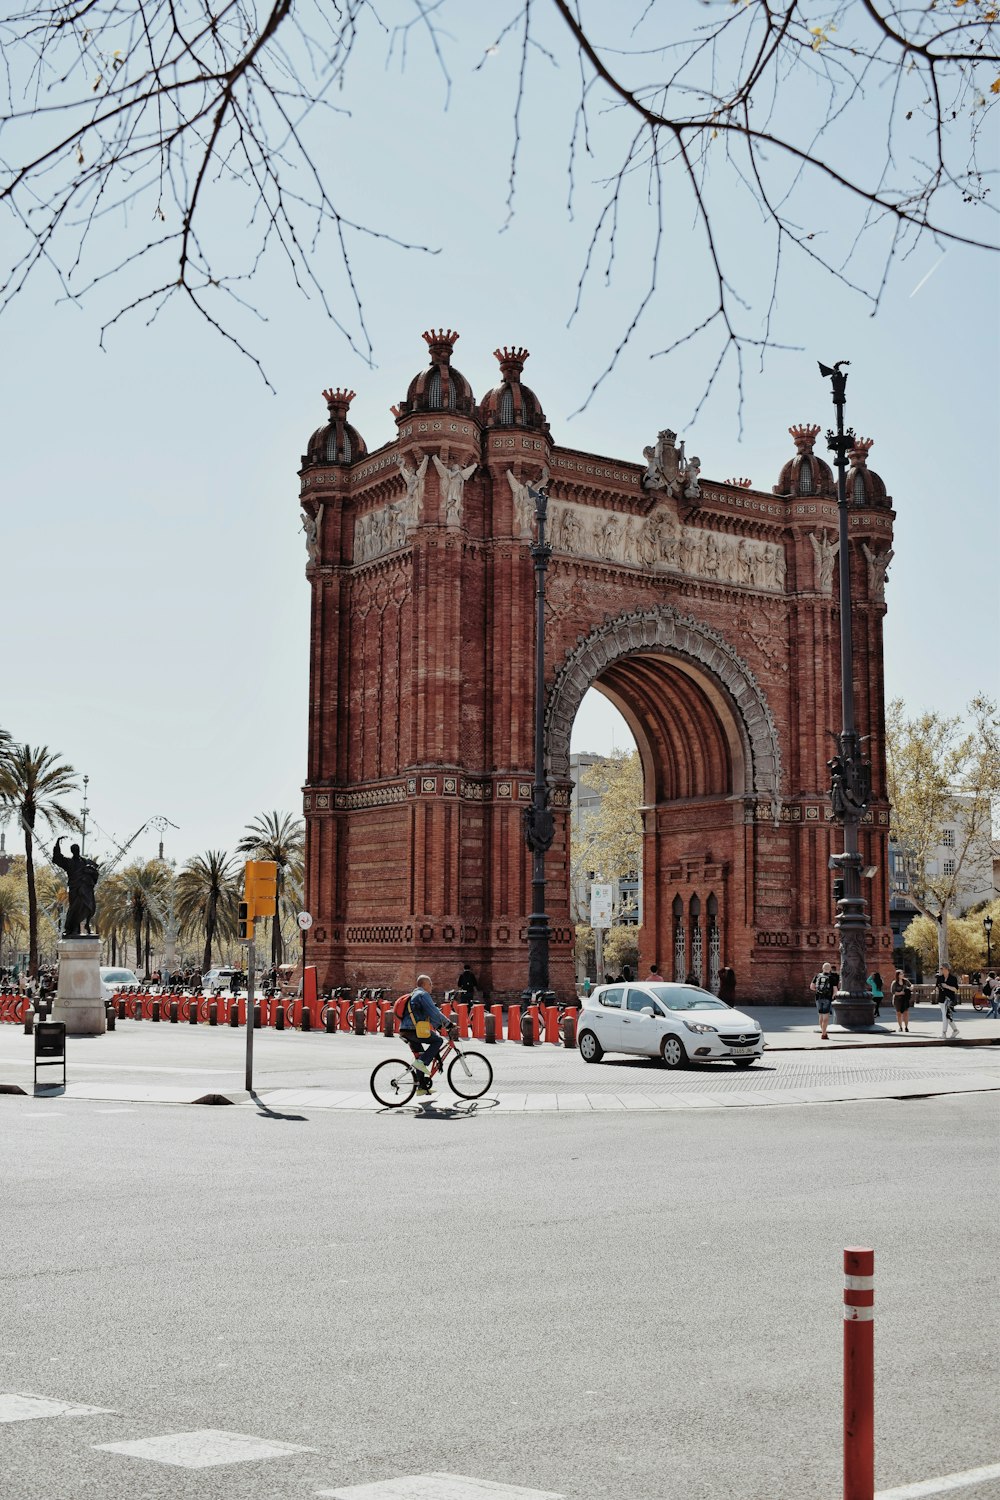 a large stone arch with a person riding a bicycle